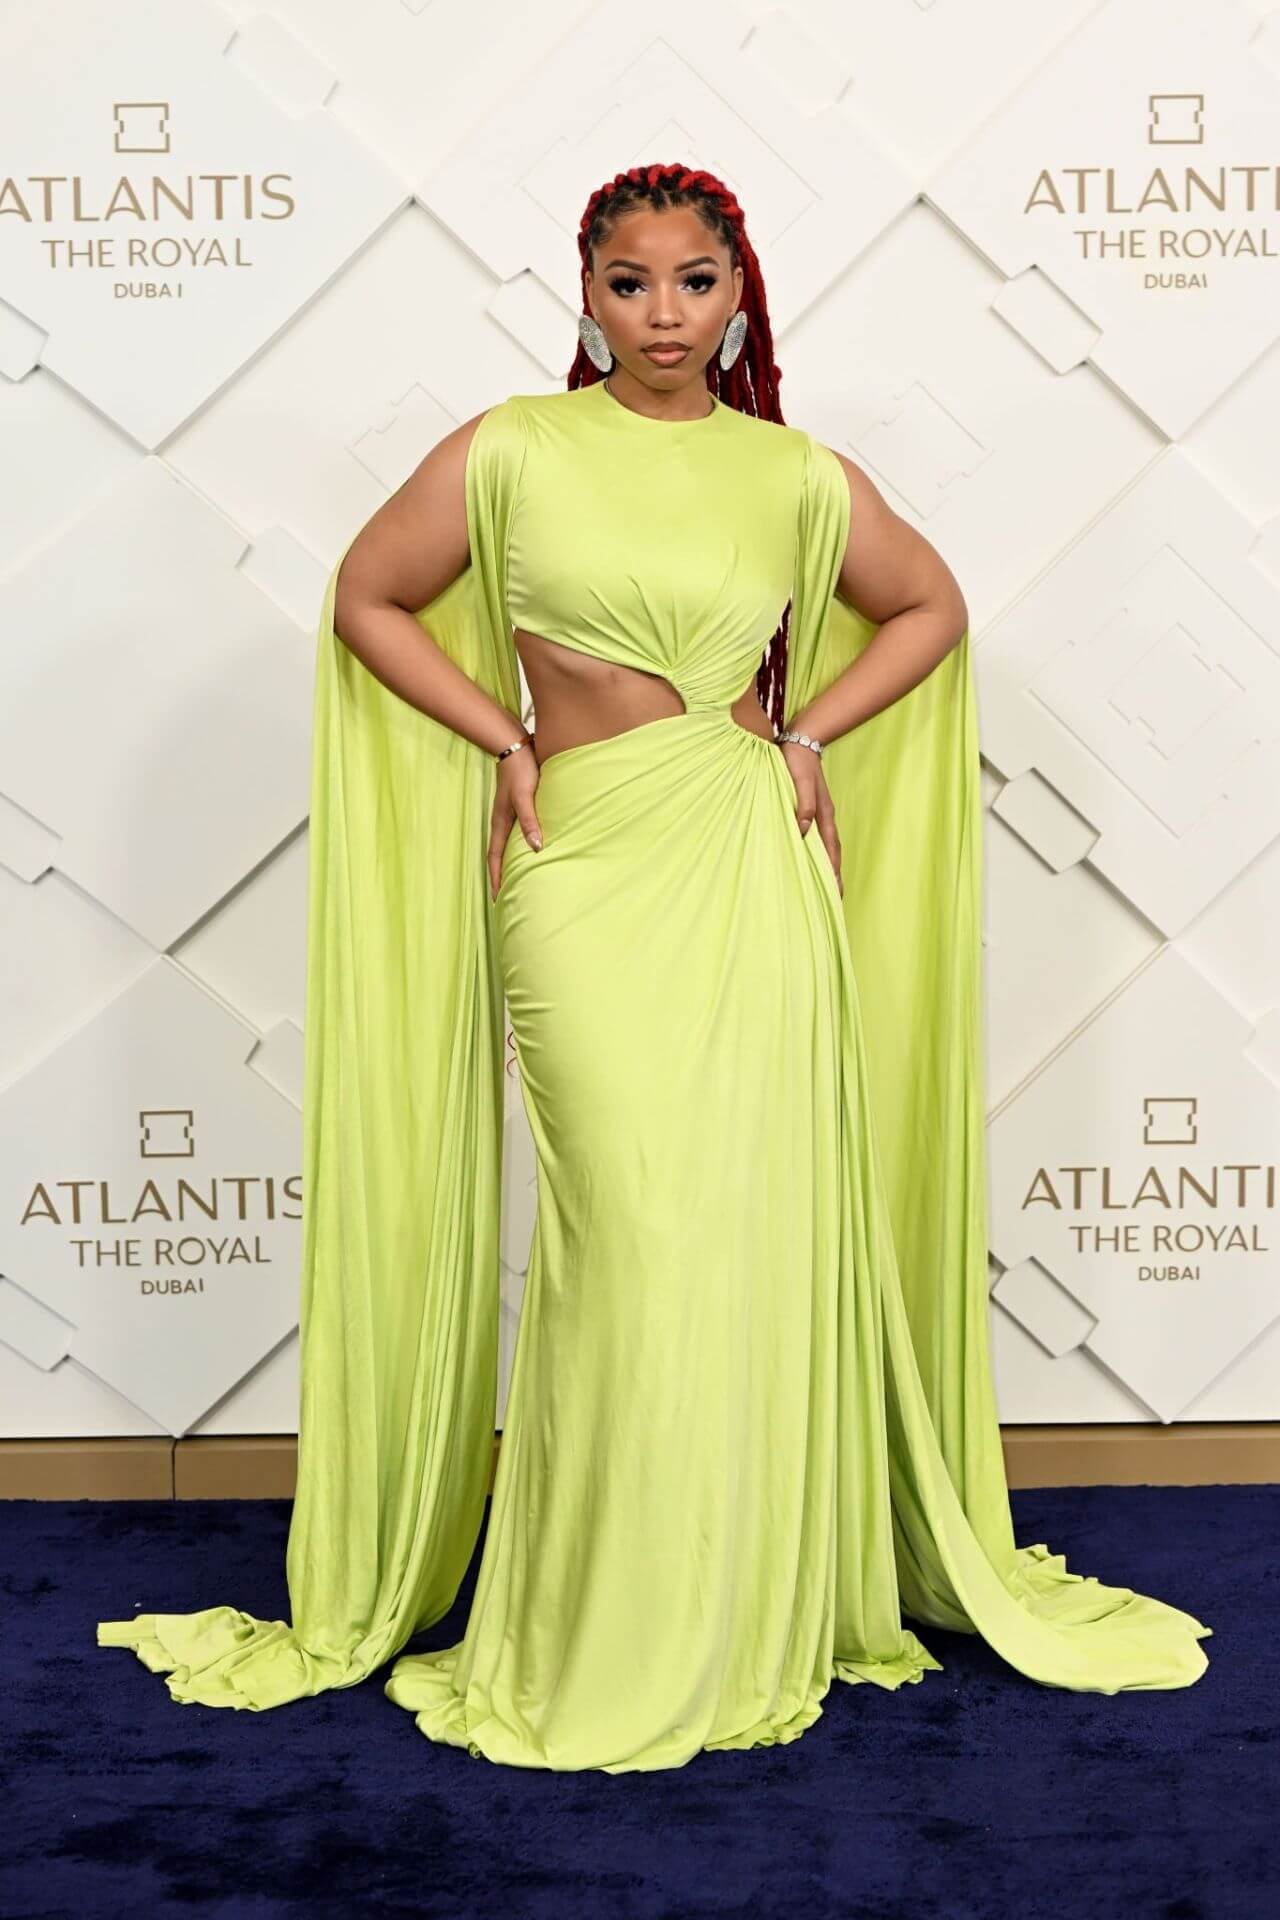 Chloe Bailey In Neon With Draping Style Cut Out Long Dress At Grand Reveal Weekend for Atlantis The Royal Dubai